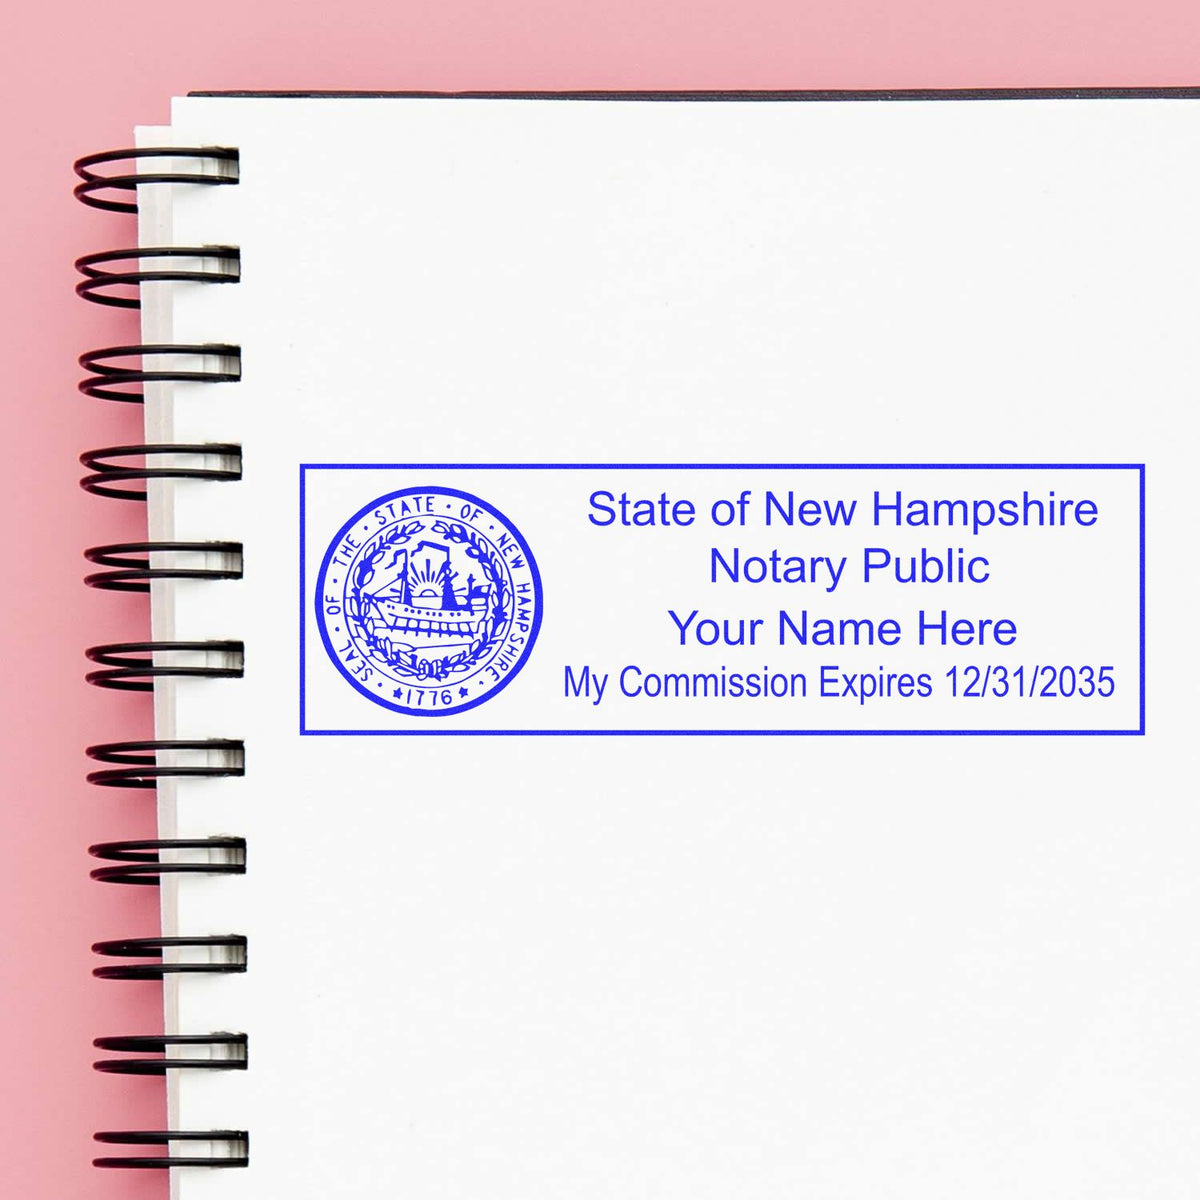 An alternative view of the Super Slim New Hampshire Notary Public Stamp stamped on a sheet of paper showing the image in use